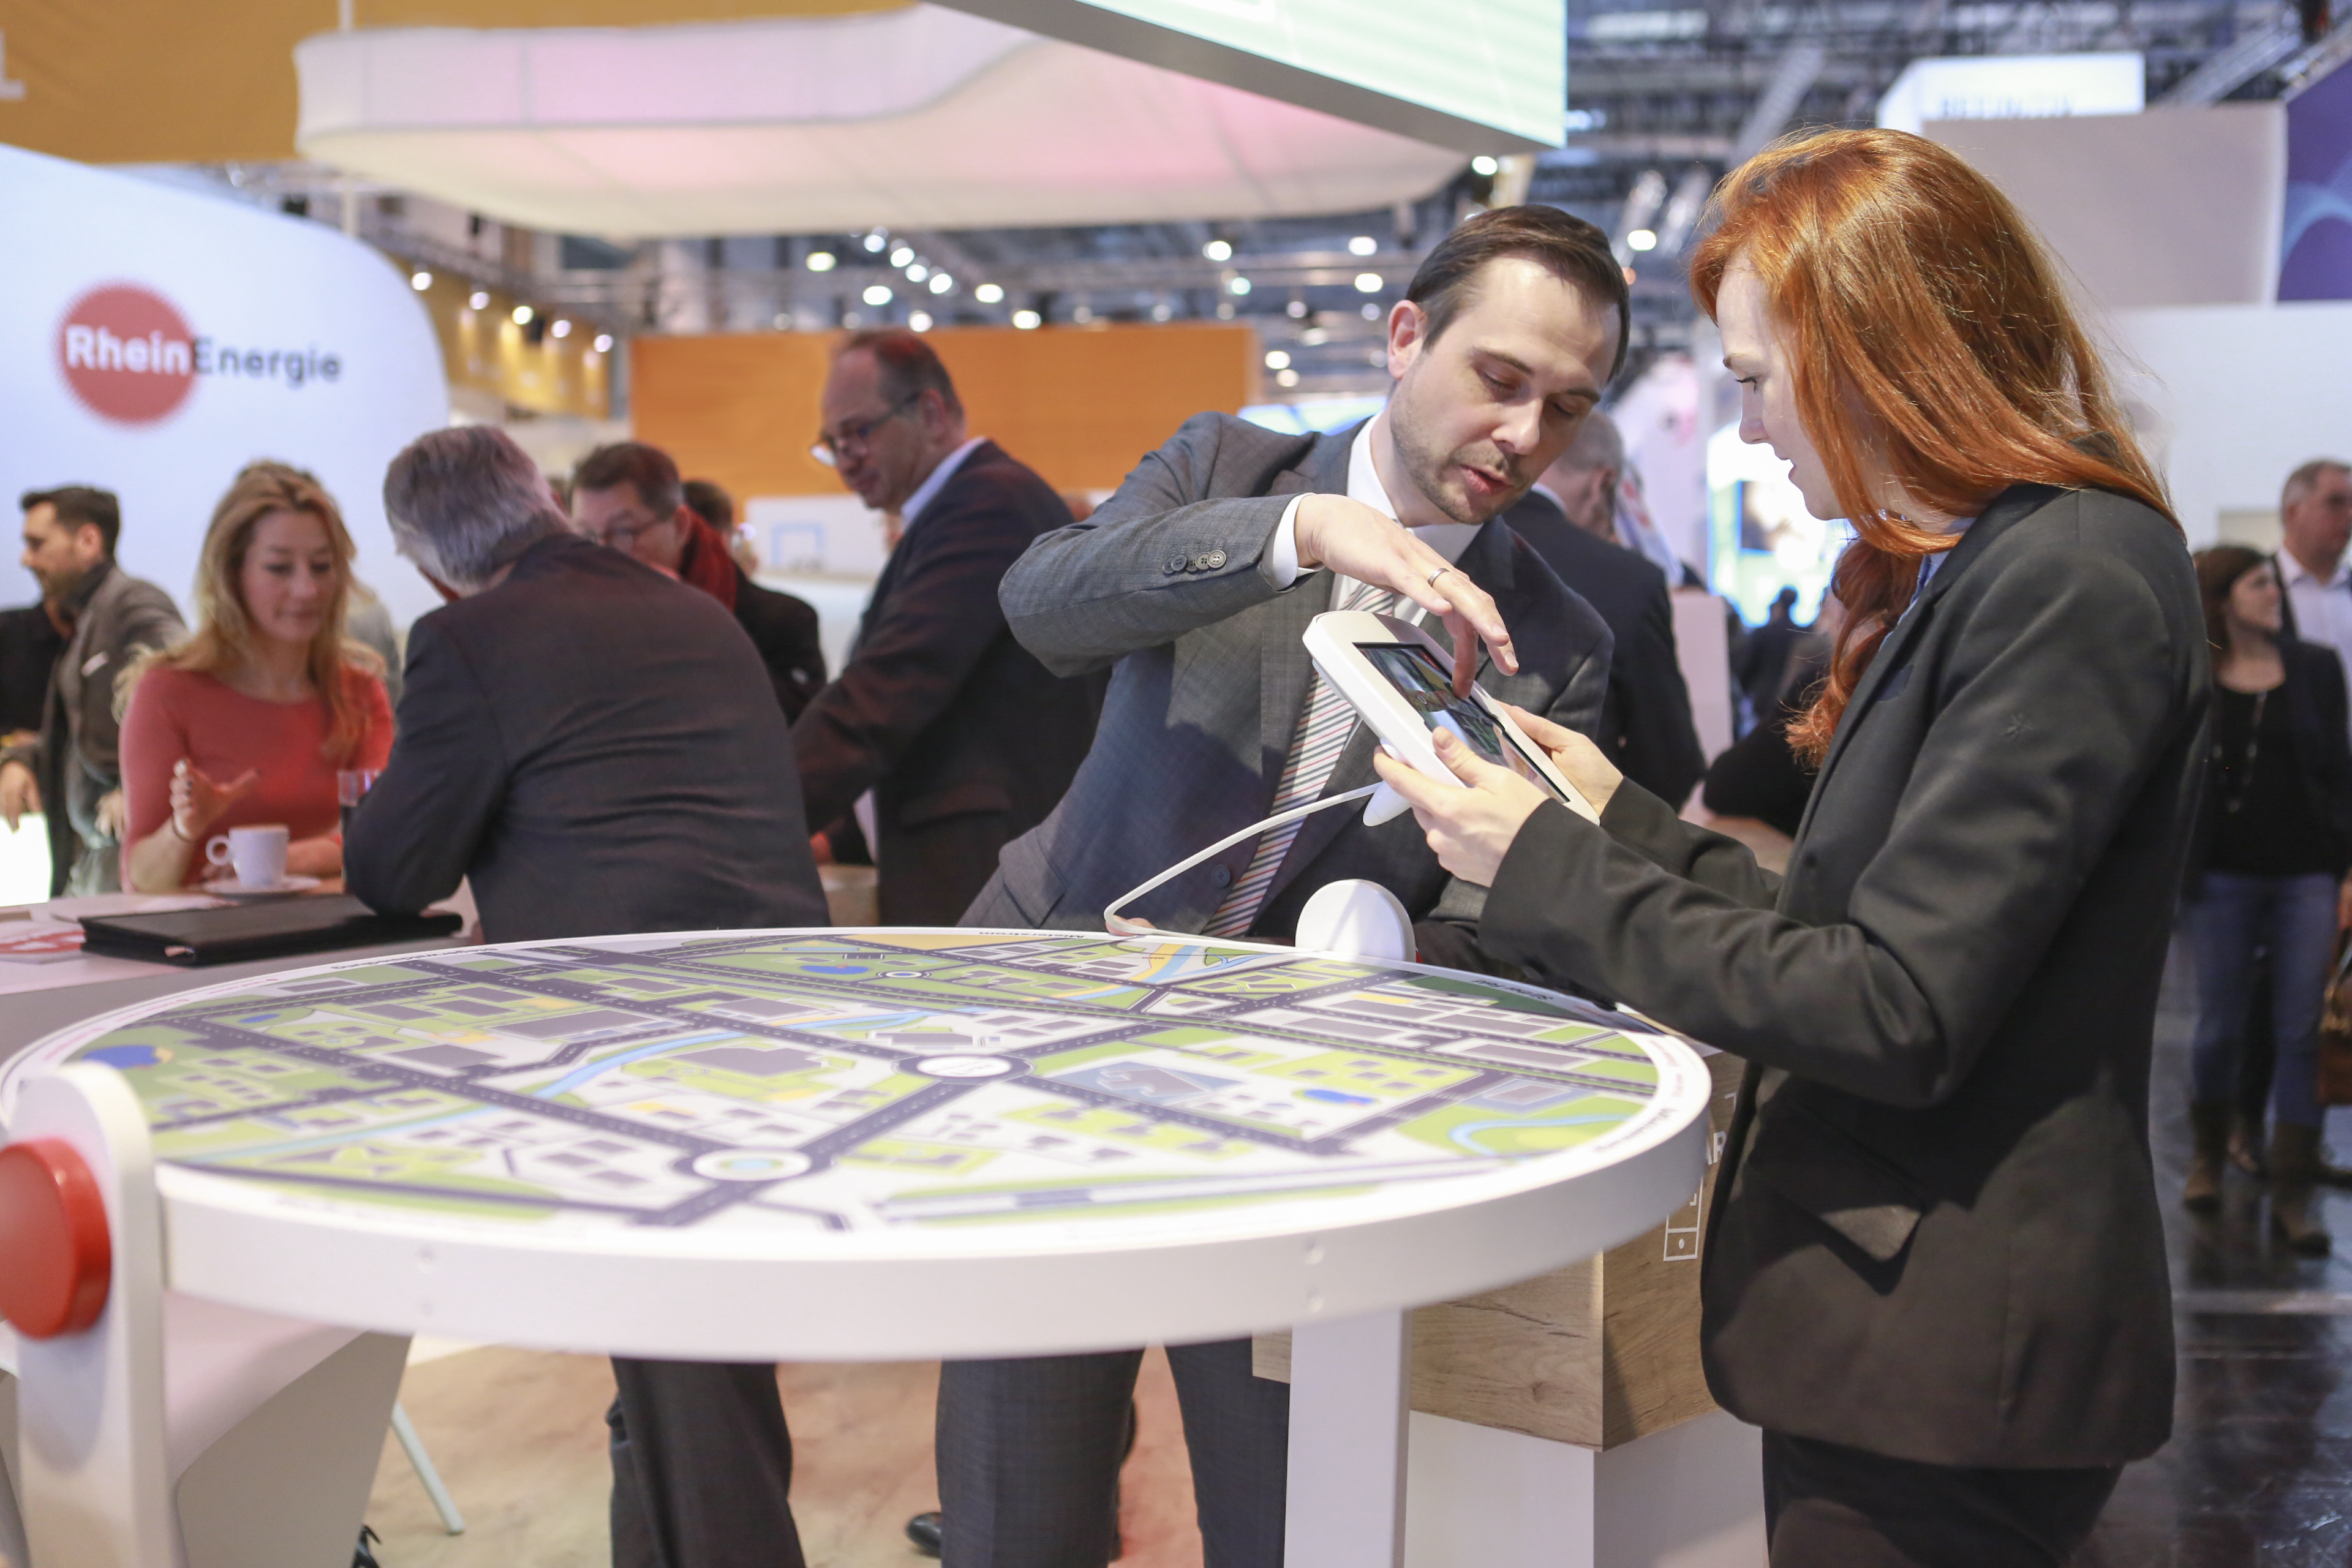 AR-App E-World, in conjunction with a circular, table-sized marker as an eye-catcher